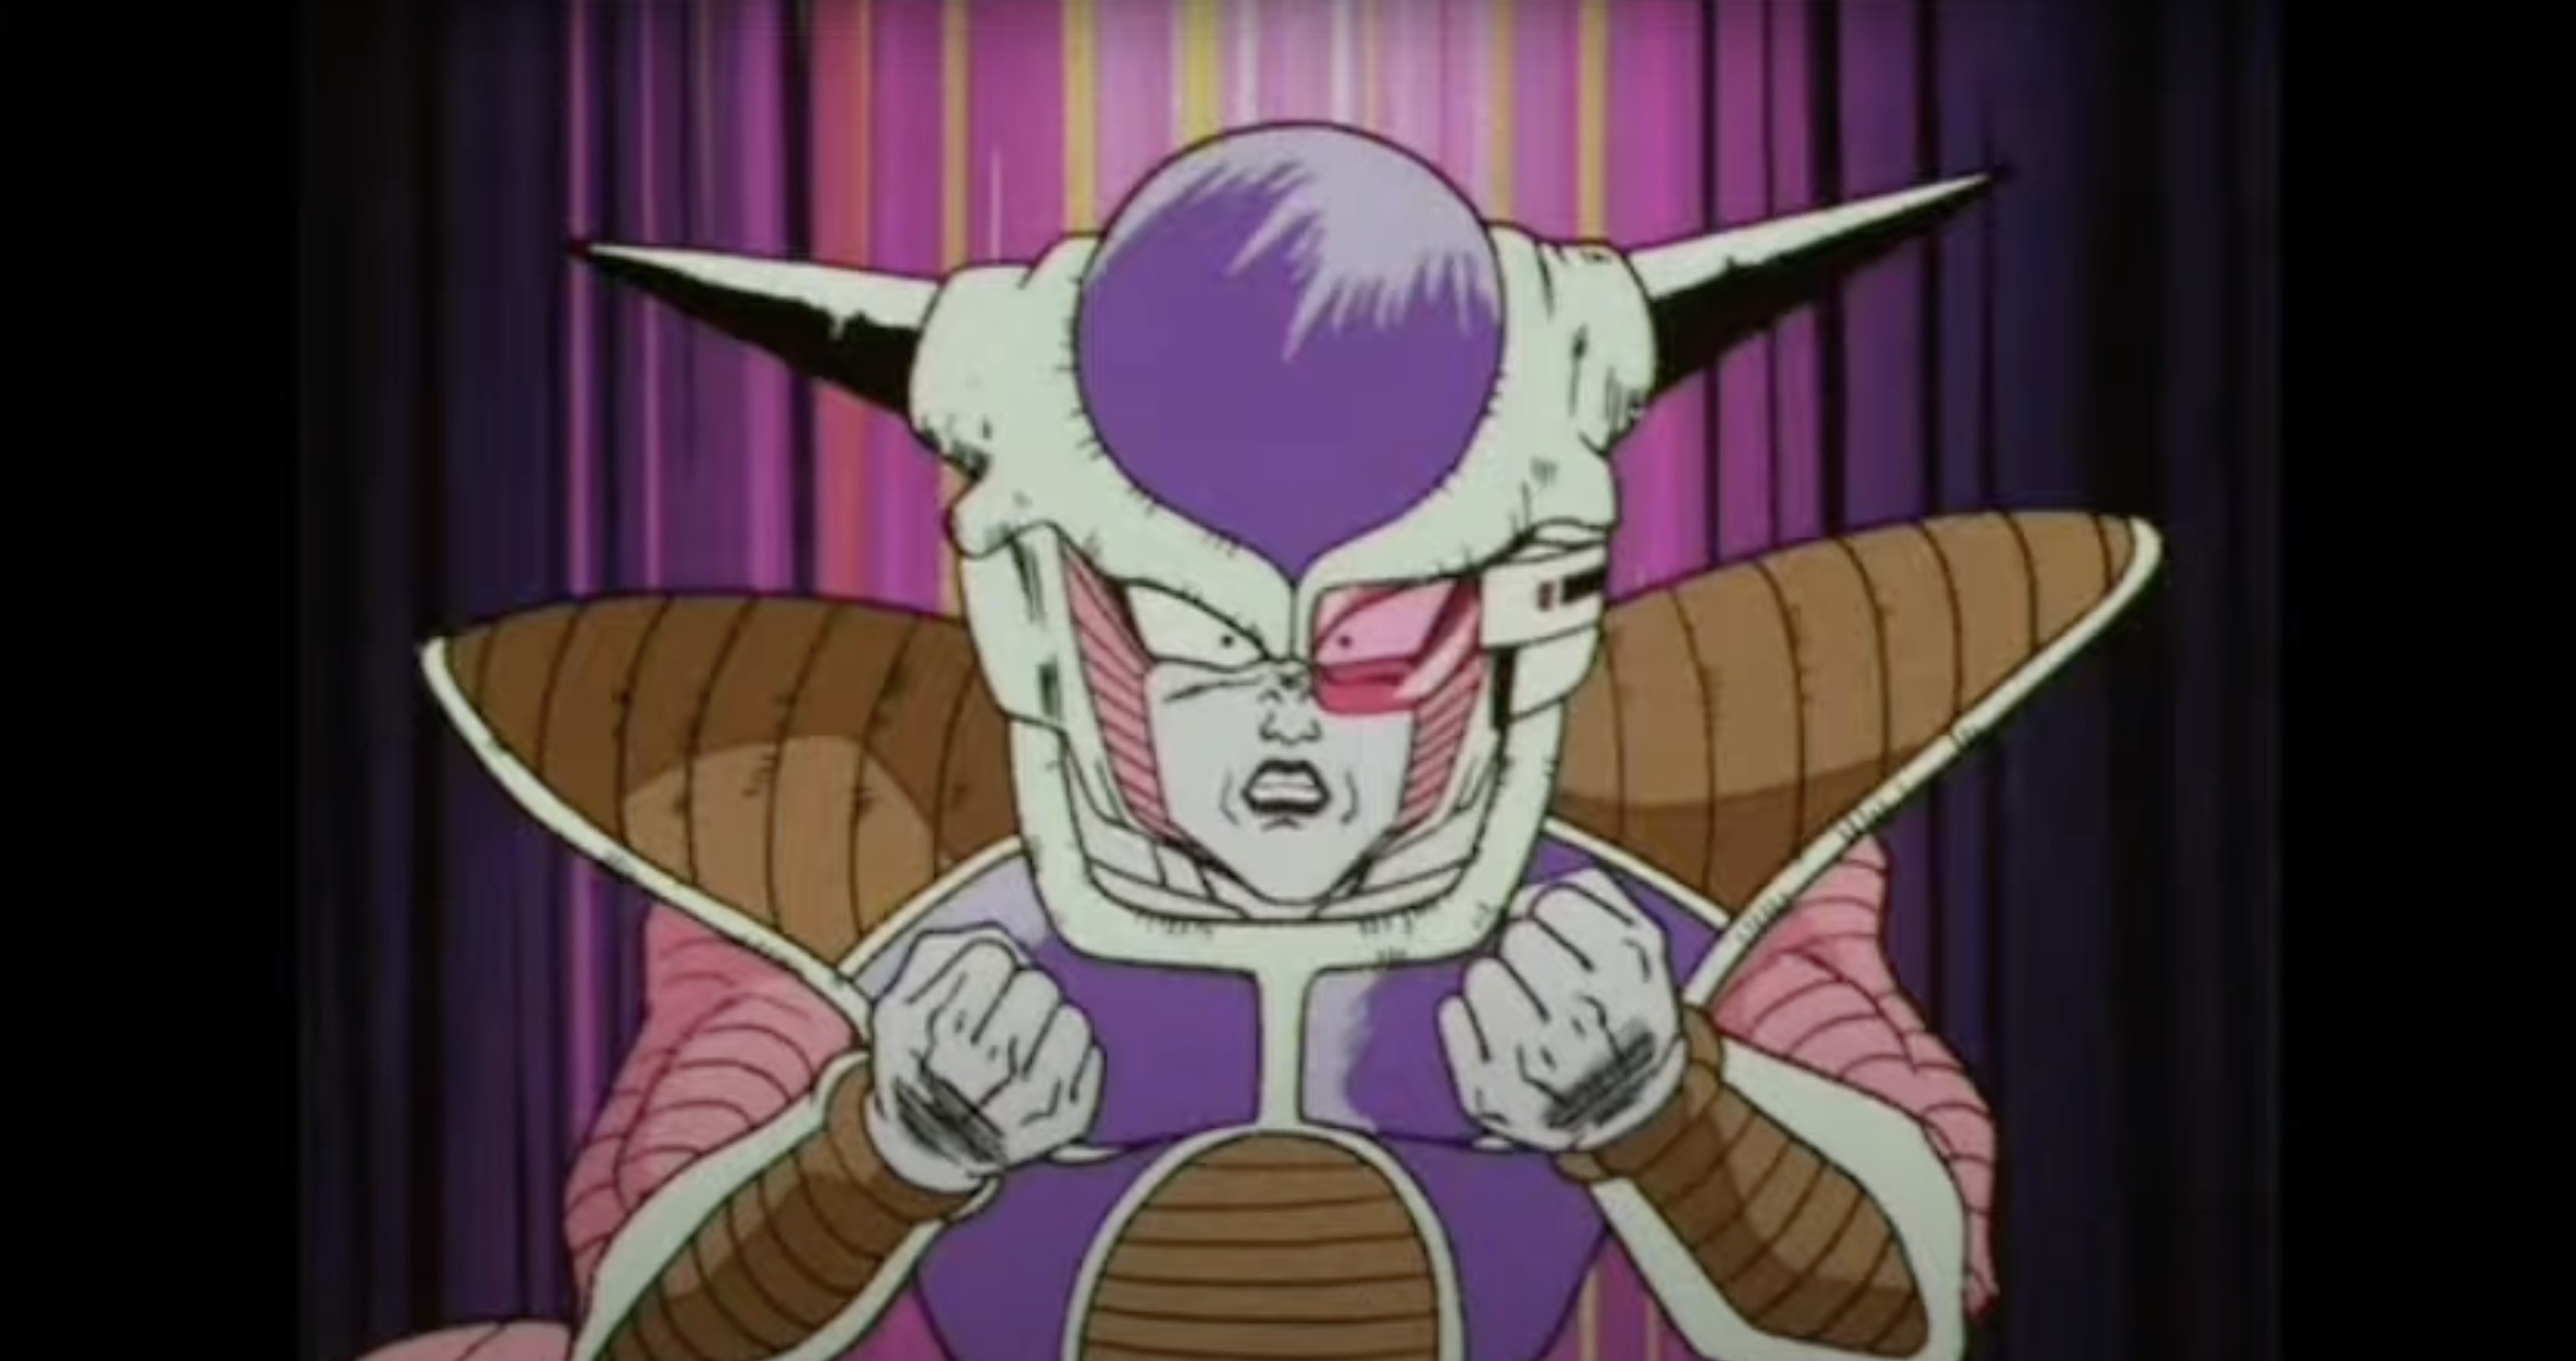 Frieza clenches his fist with rage